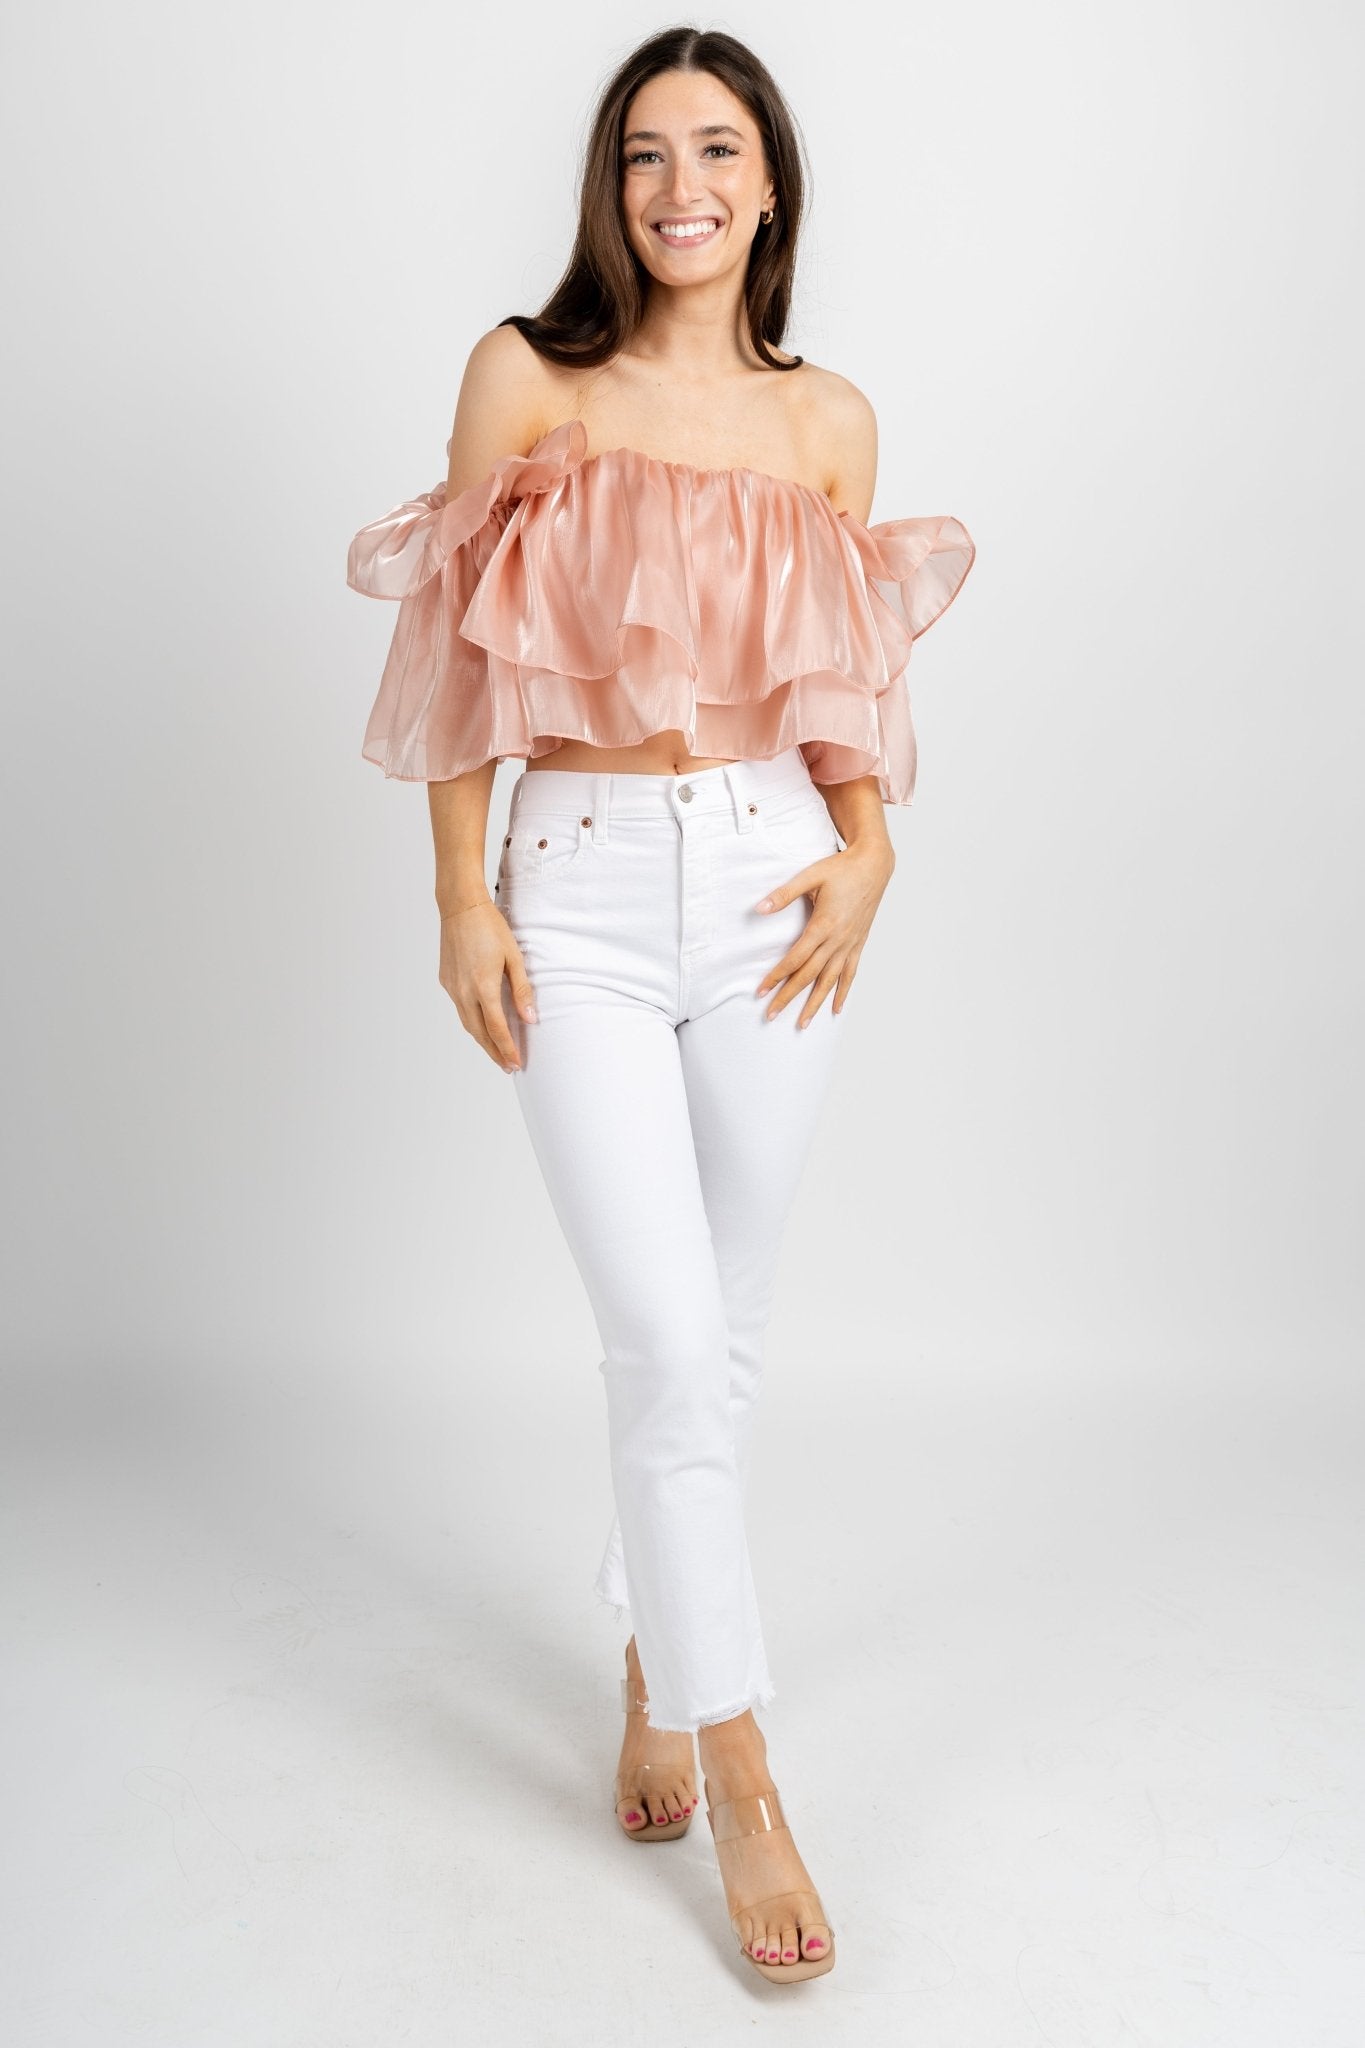 Ruffle off shoulder top blush - Affordable Top - Unique Easter Style at Lush Fashion Lounge Boutique in Oklahoma